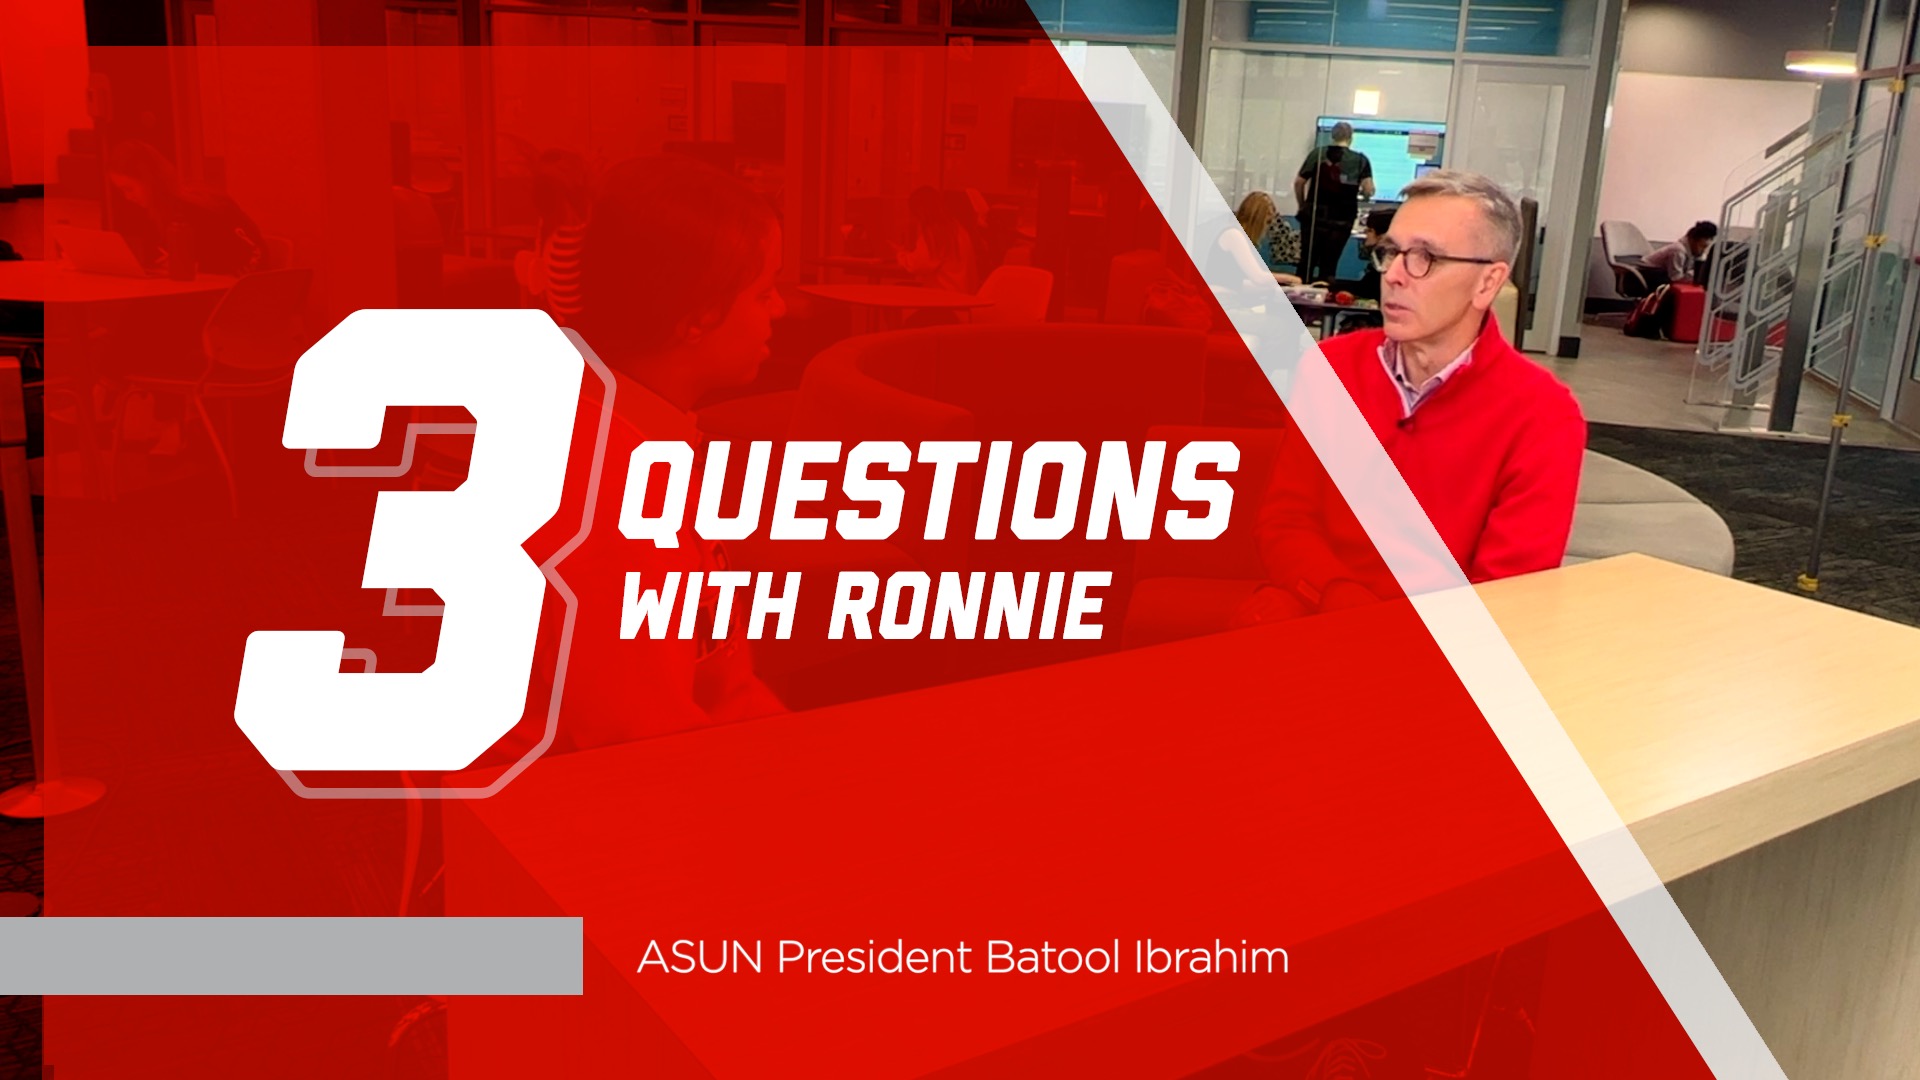 Photo Credit: 3 Questions with Ronnie - Batool Ibrahim